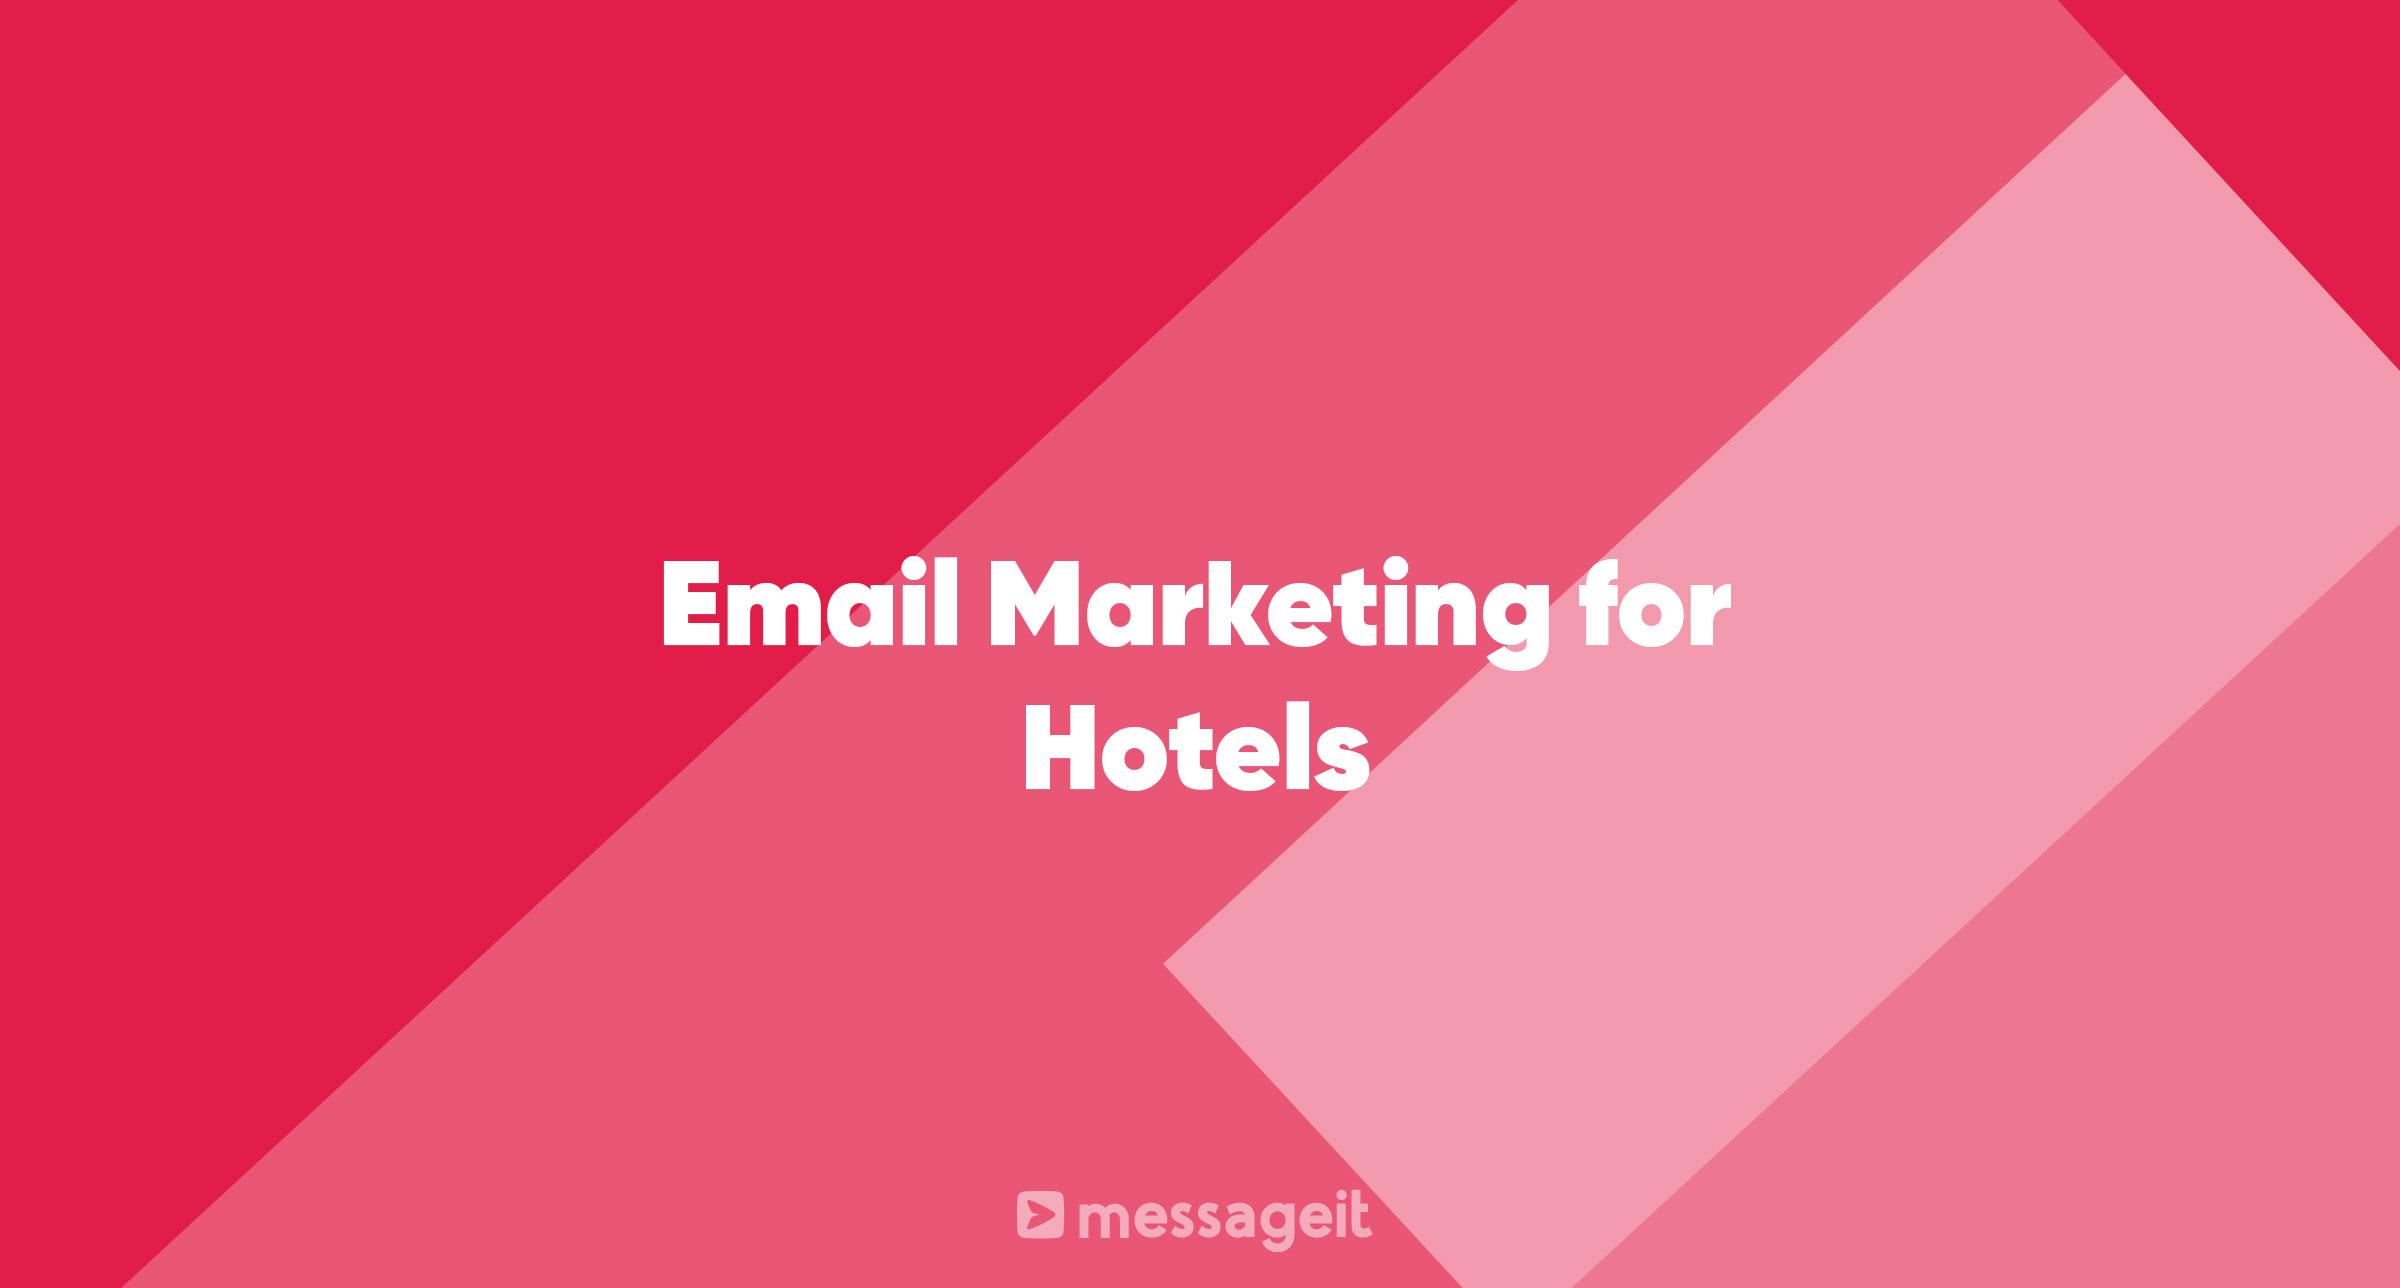 Article | Email Marketing for Hotels